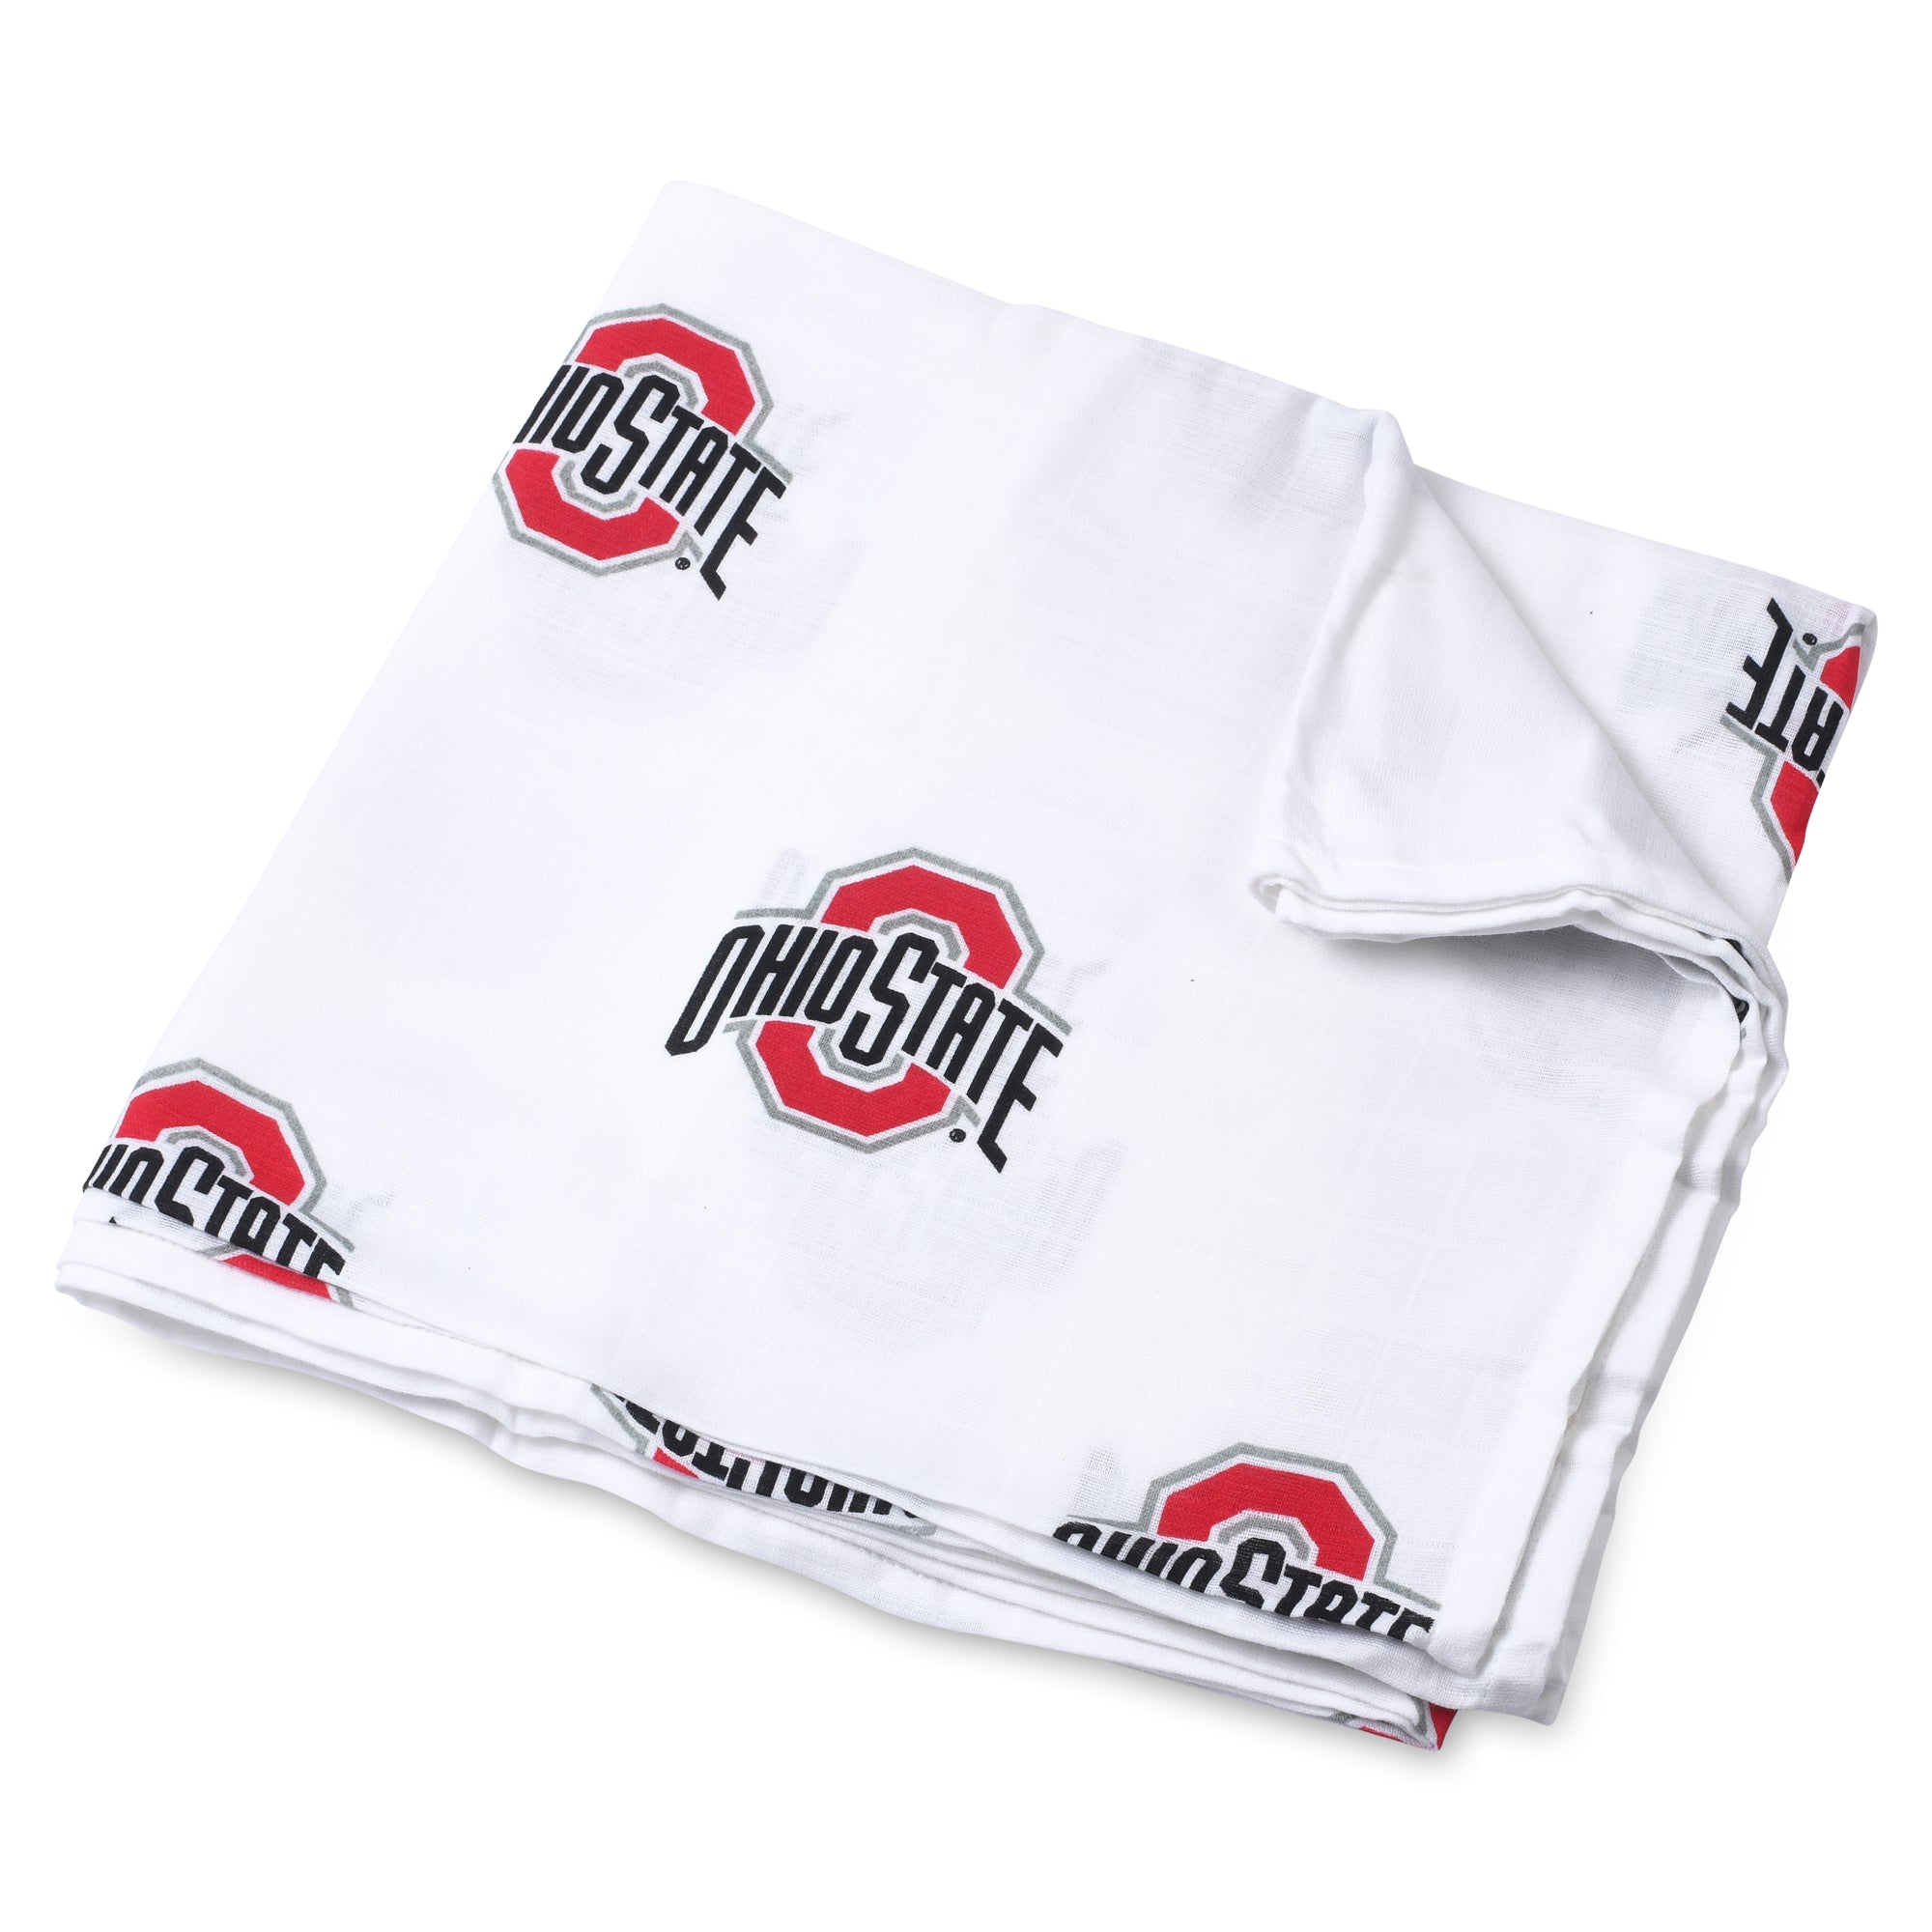 Ohio Northern University Throw Blankets for Sale